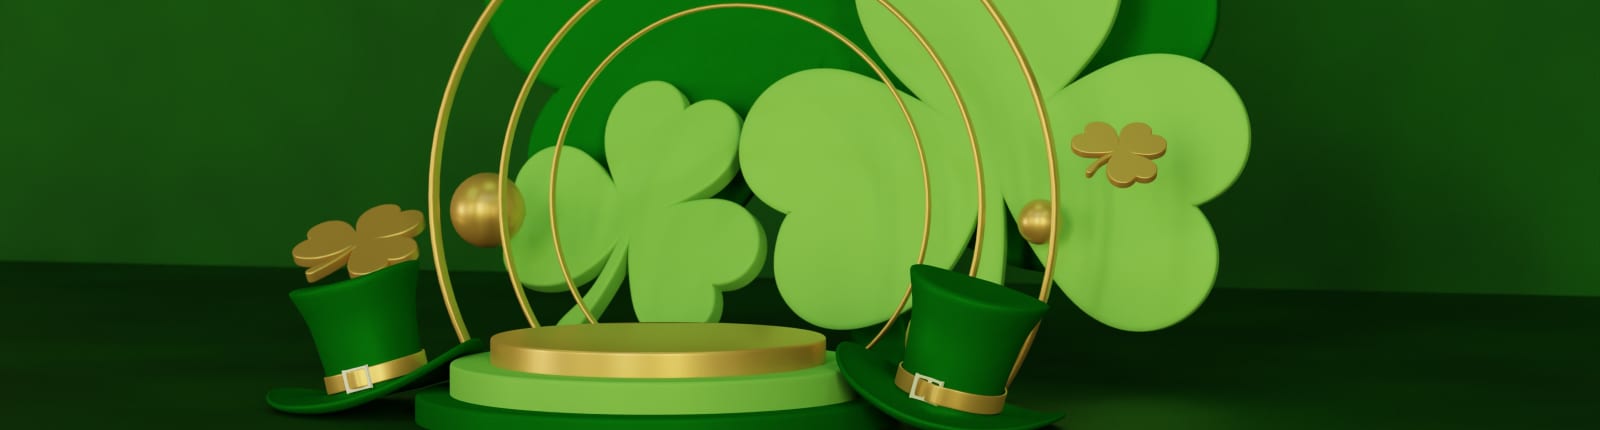 St. Patrick's Day Trivia: A young - Brandeis University